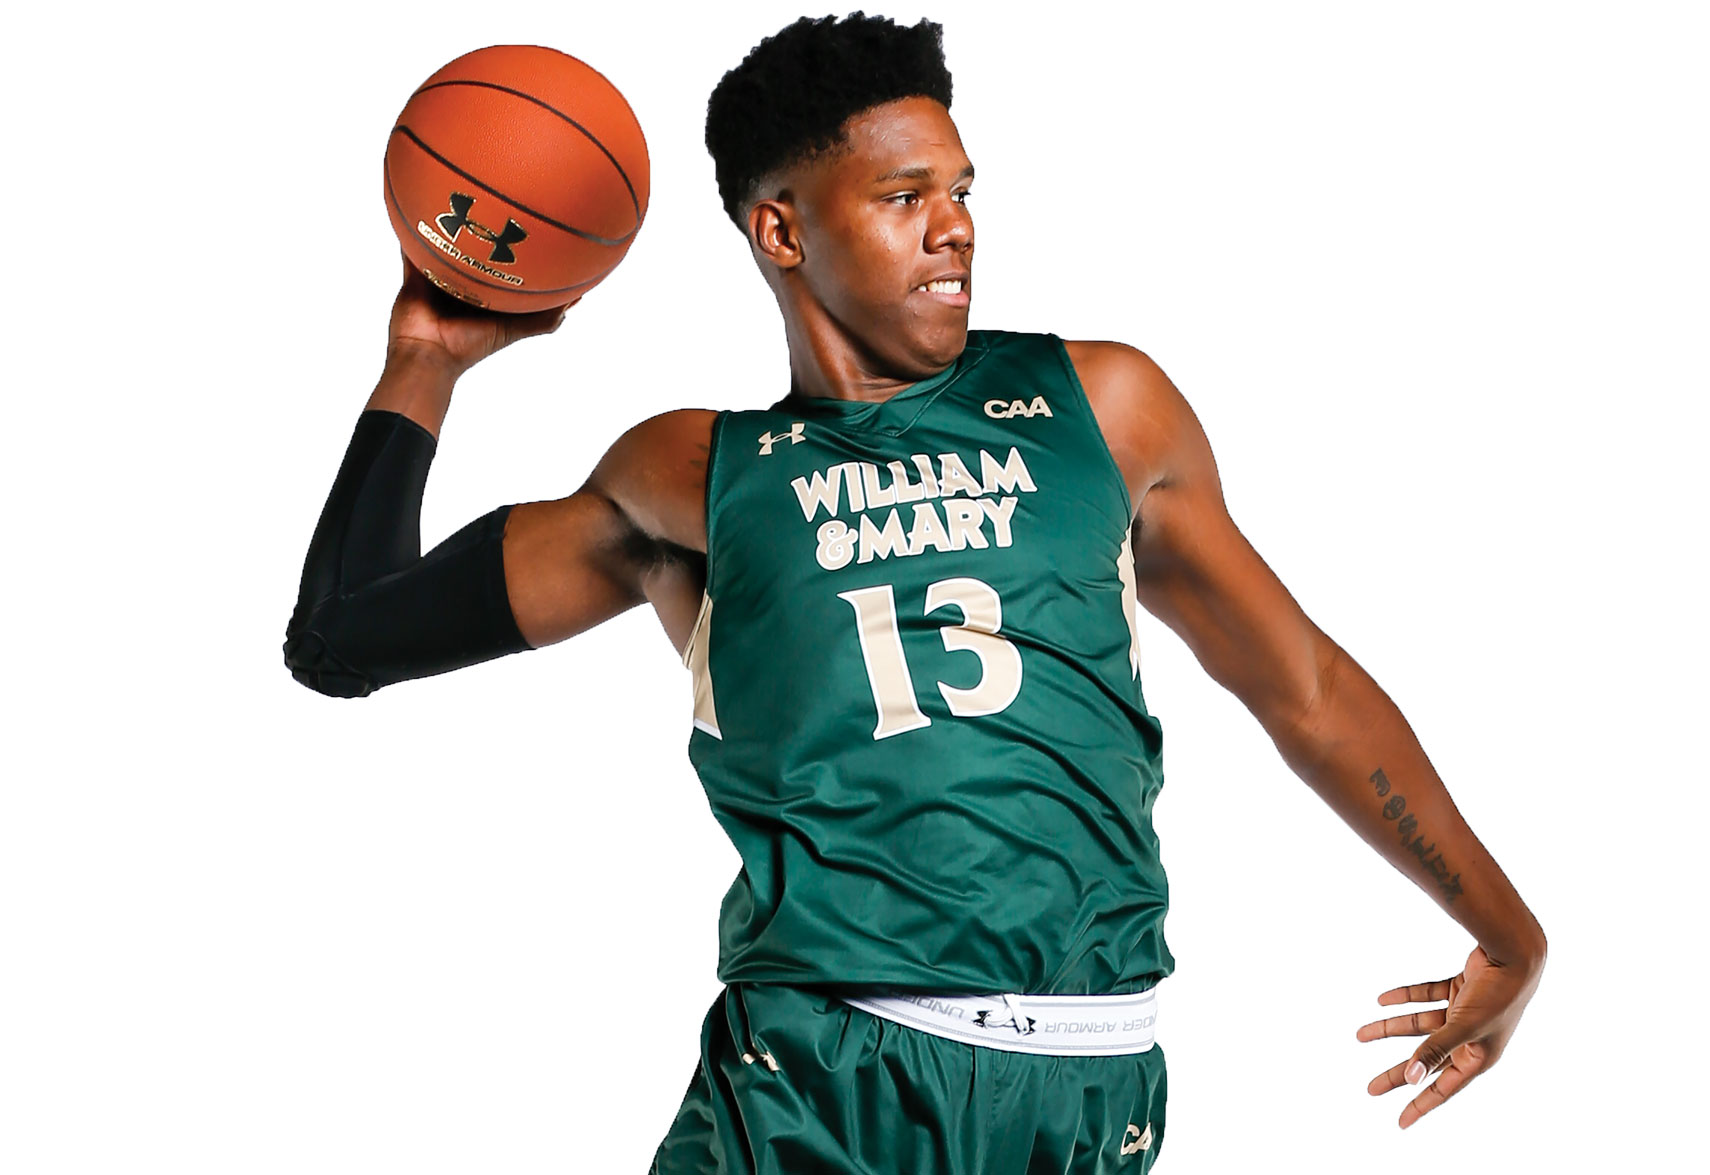 Nathan Knight returning to William & Mary